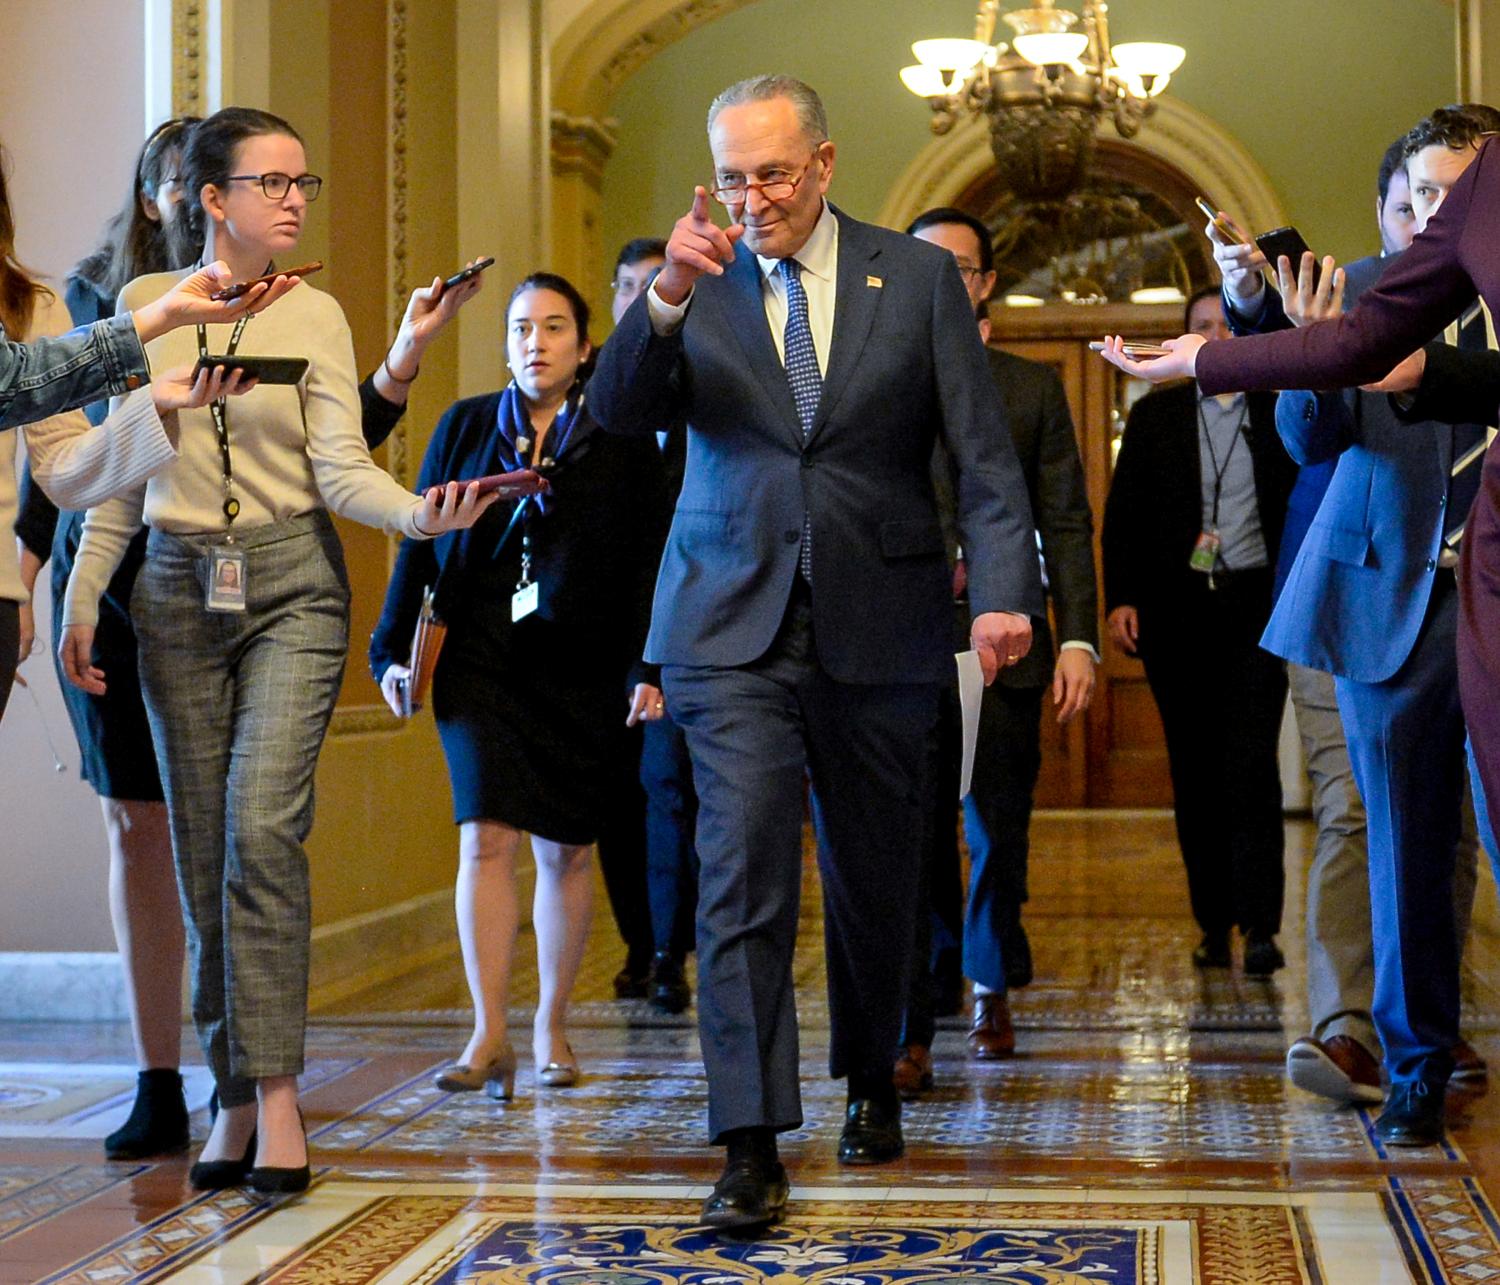 U.S. Senate Minority Leader Chuck Schumer (D-NY)  heads to a meeting in the office of U.S. Senate Majority Leader Mitch McConnell (R-KY) to wrap up work on coronavirus economic aid legislation, during the coronavirus disease (COVID-19) outbreak, in Washington, U.S., March 22, 2020.      REUTERS/Mary F. Calvert